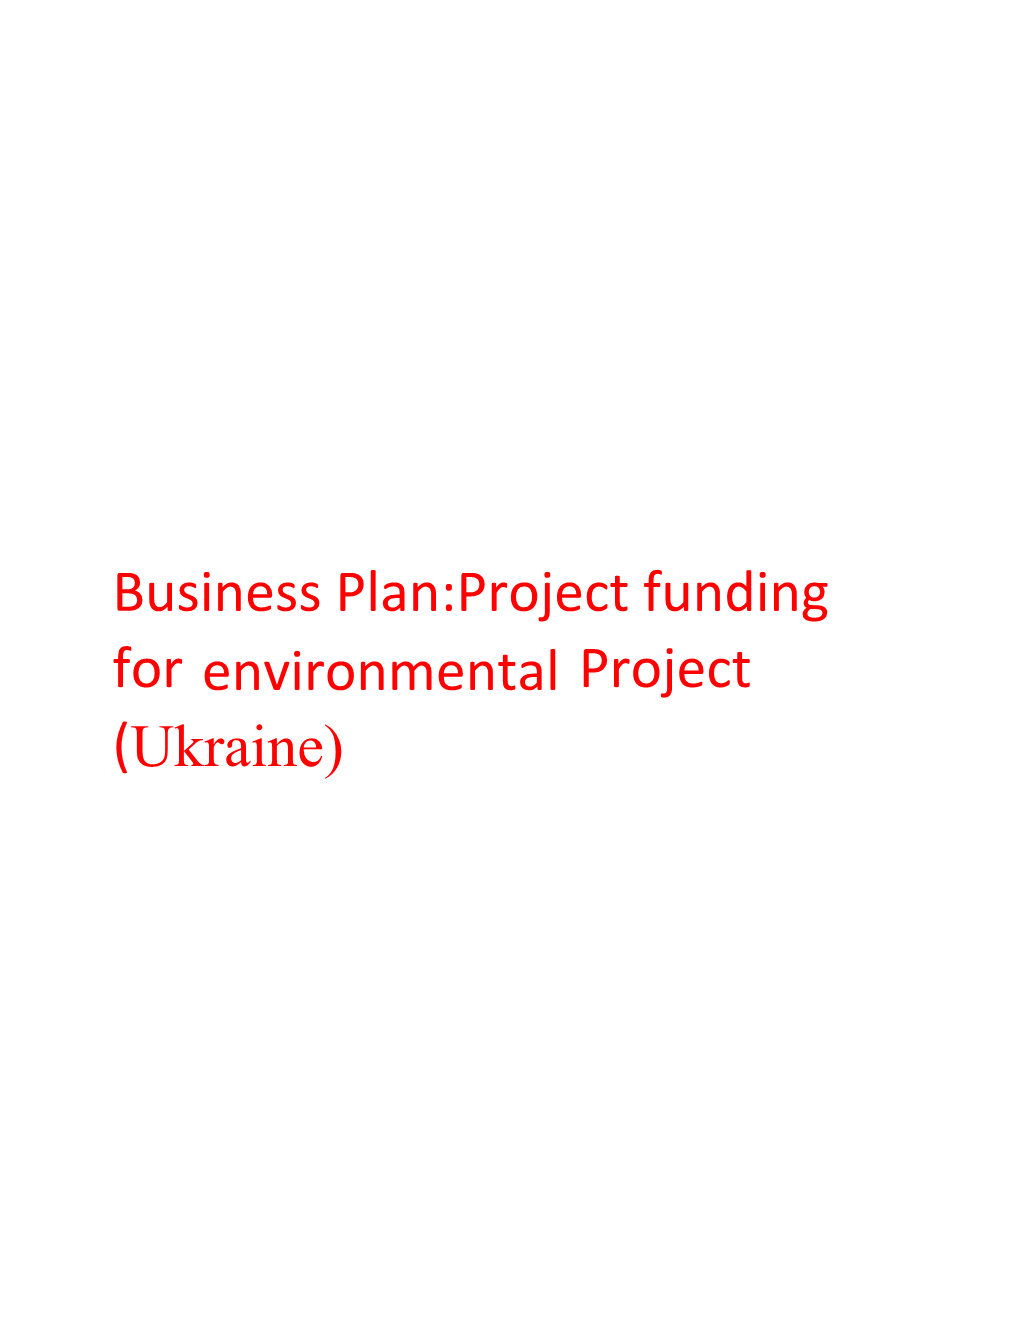 Business Plan:Project Funding for Environmental Project(Ukraine)